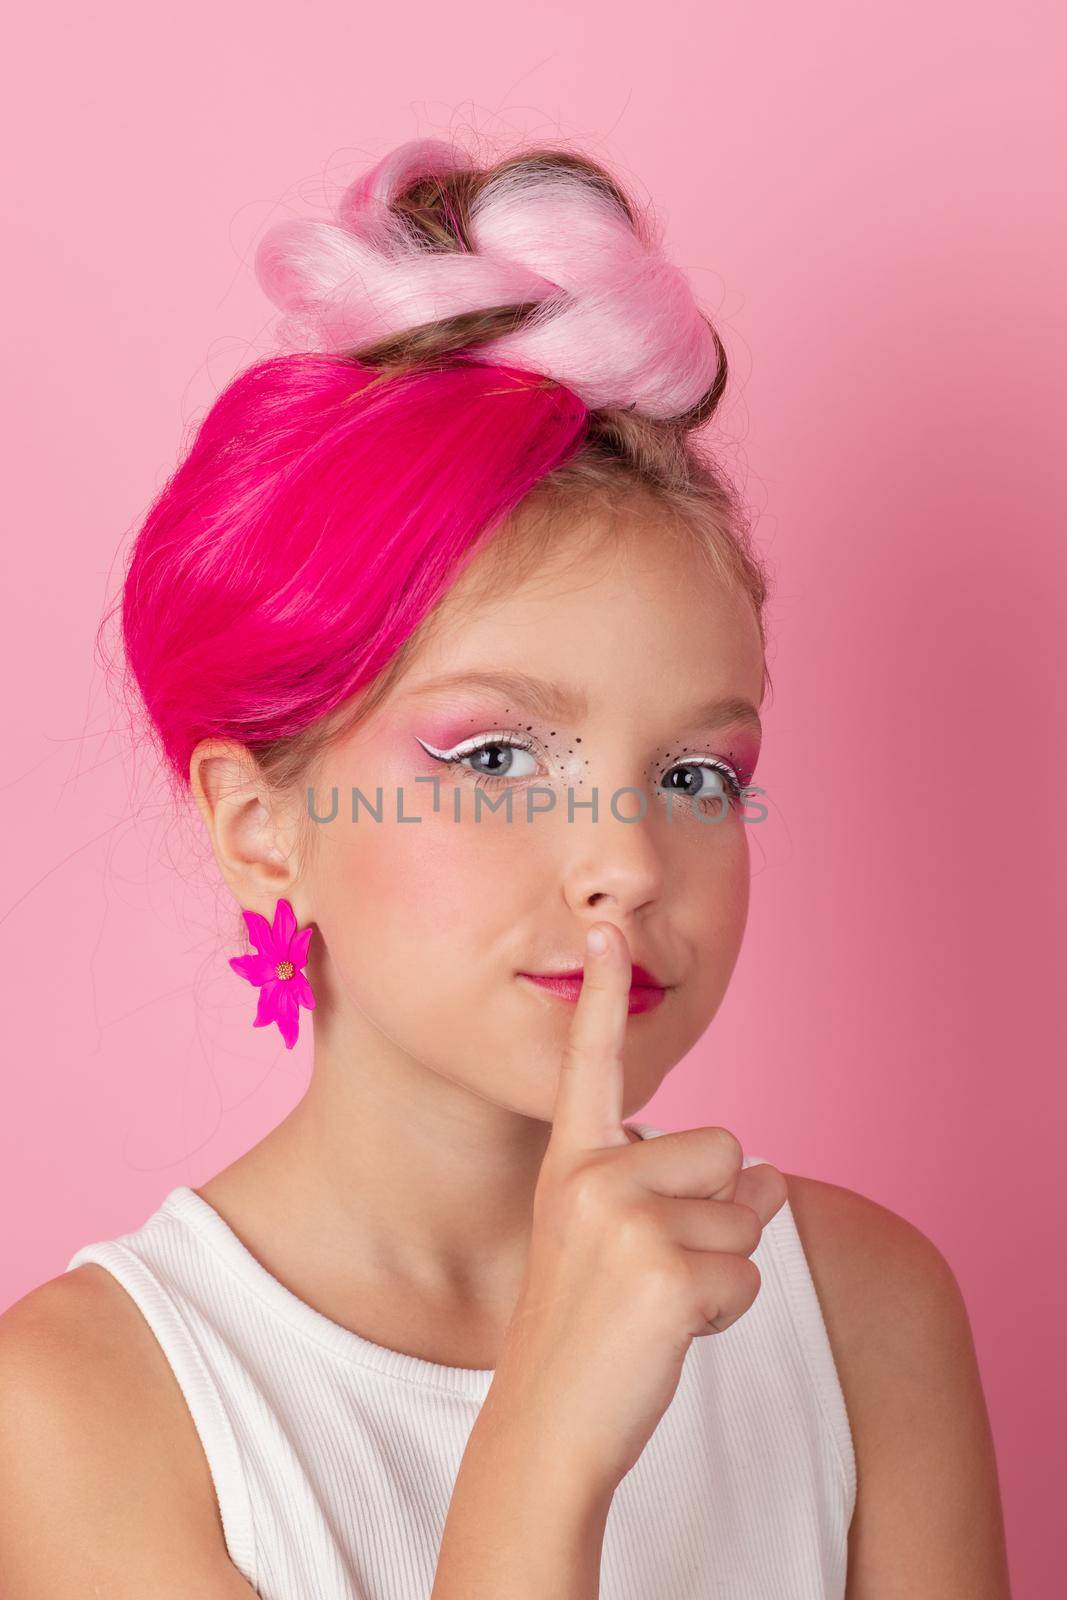 charming little girl with pink hairstyle and pink makeup. tween young model posing on pink background.